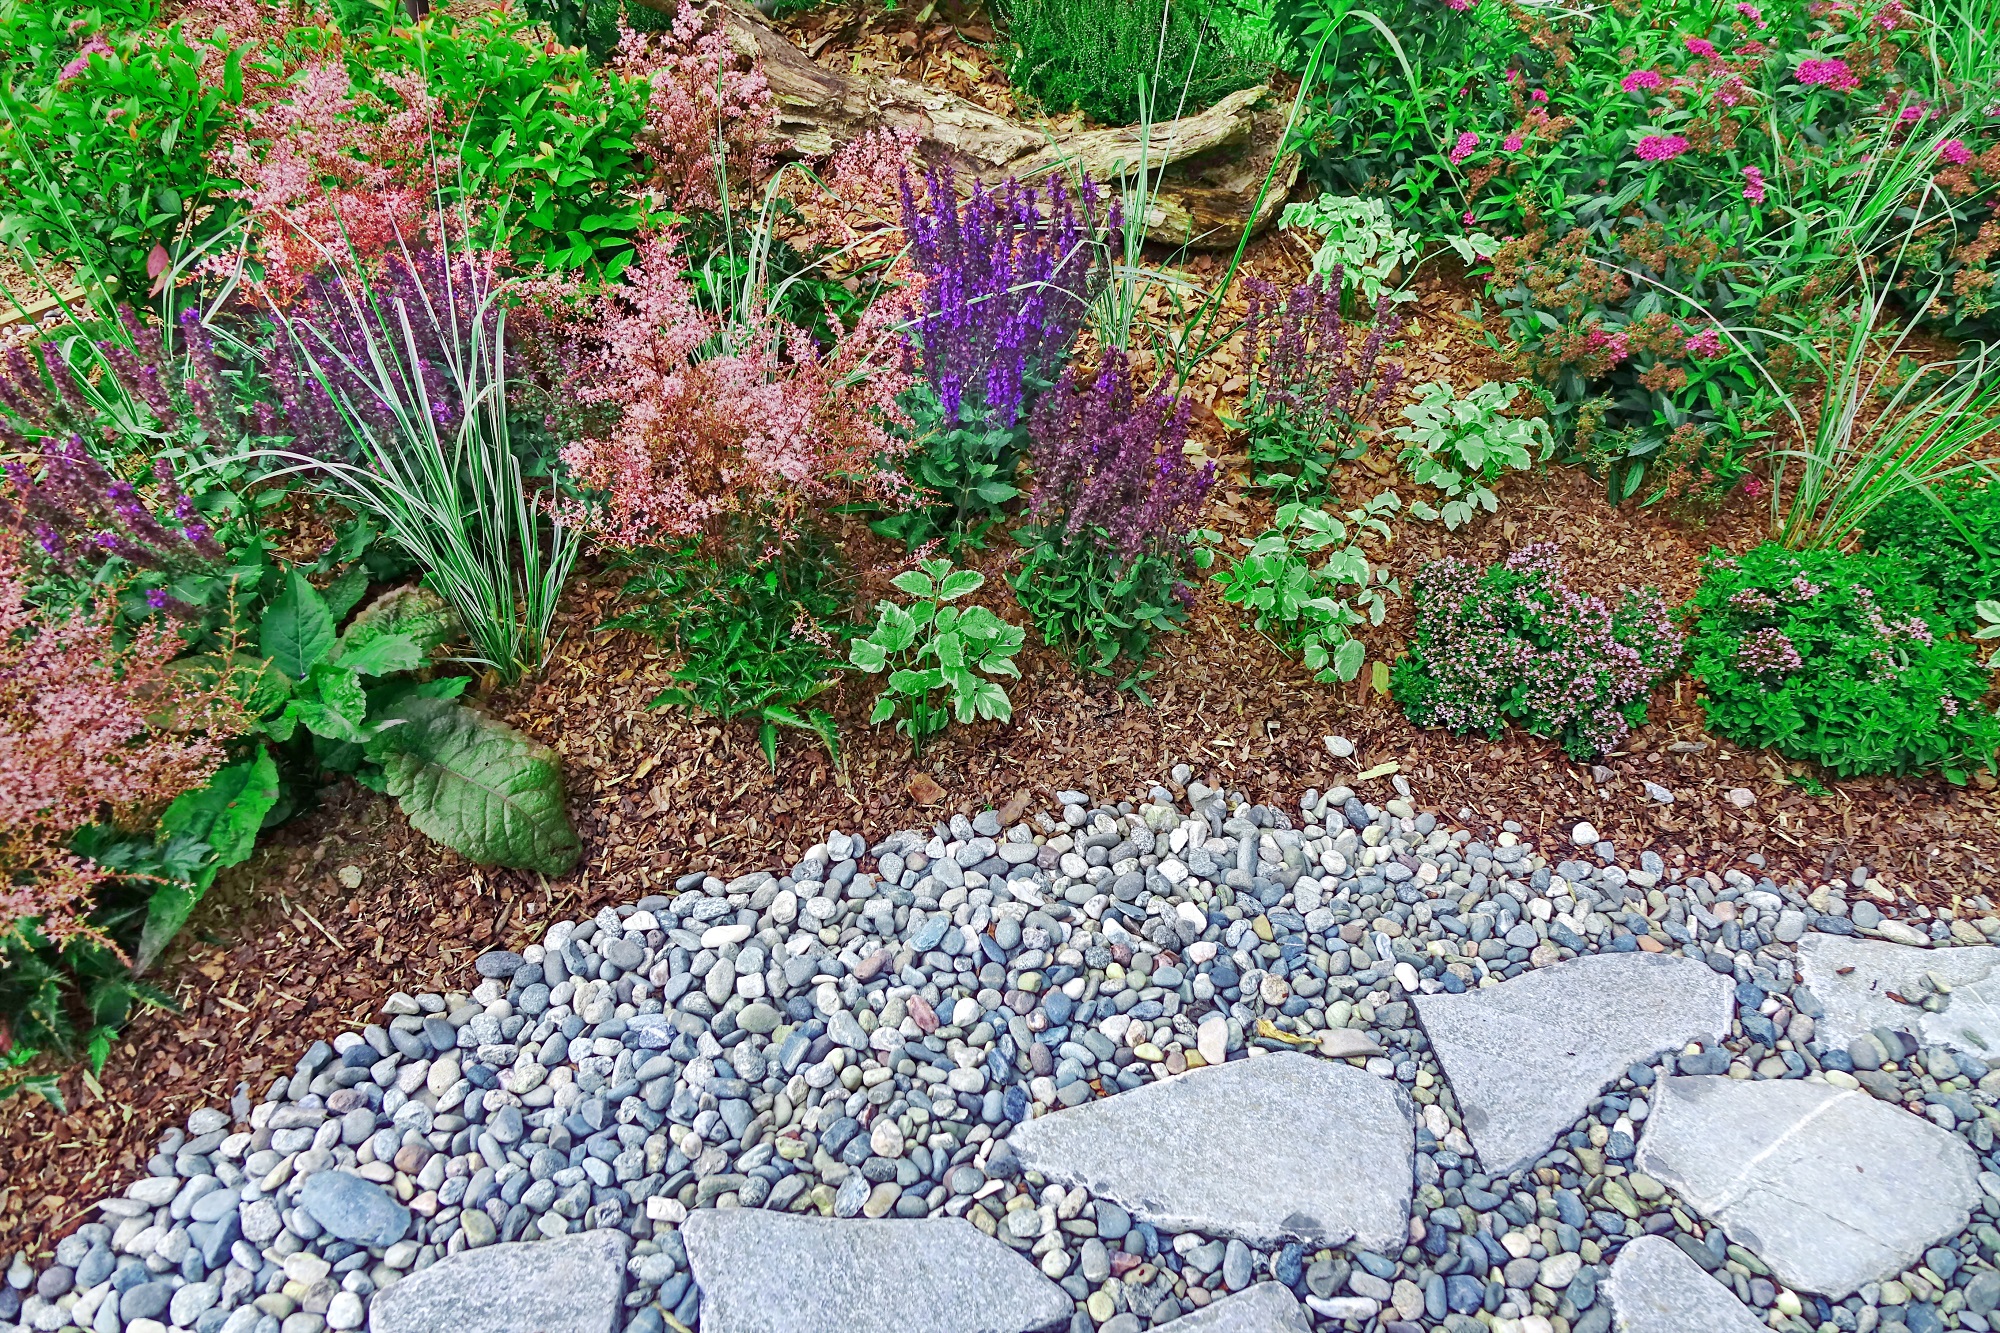 Does White Landscaping Rock Get Dirty?